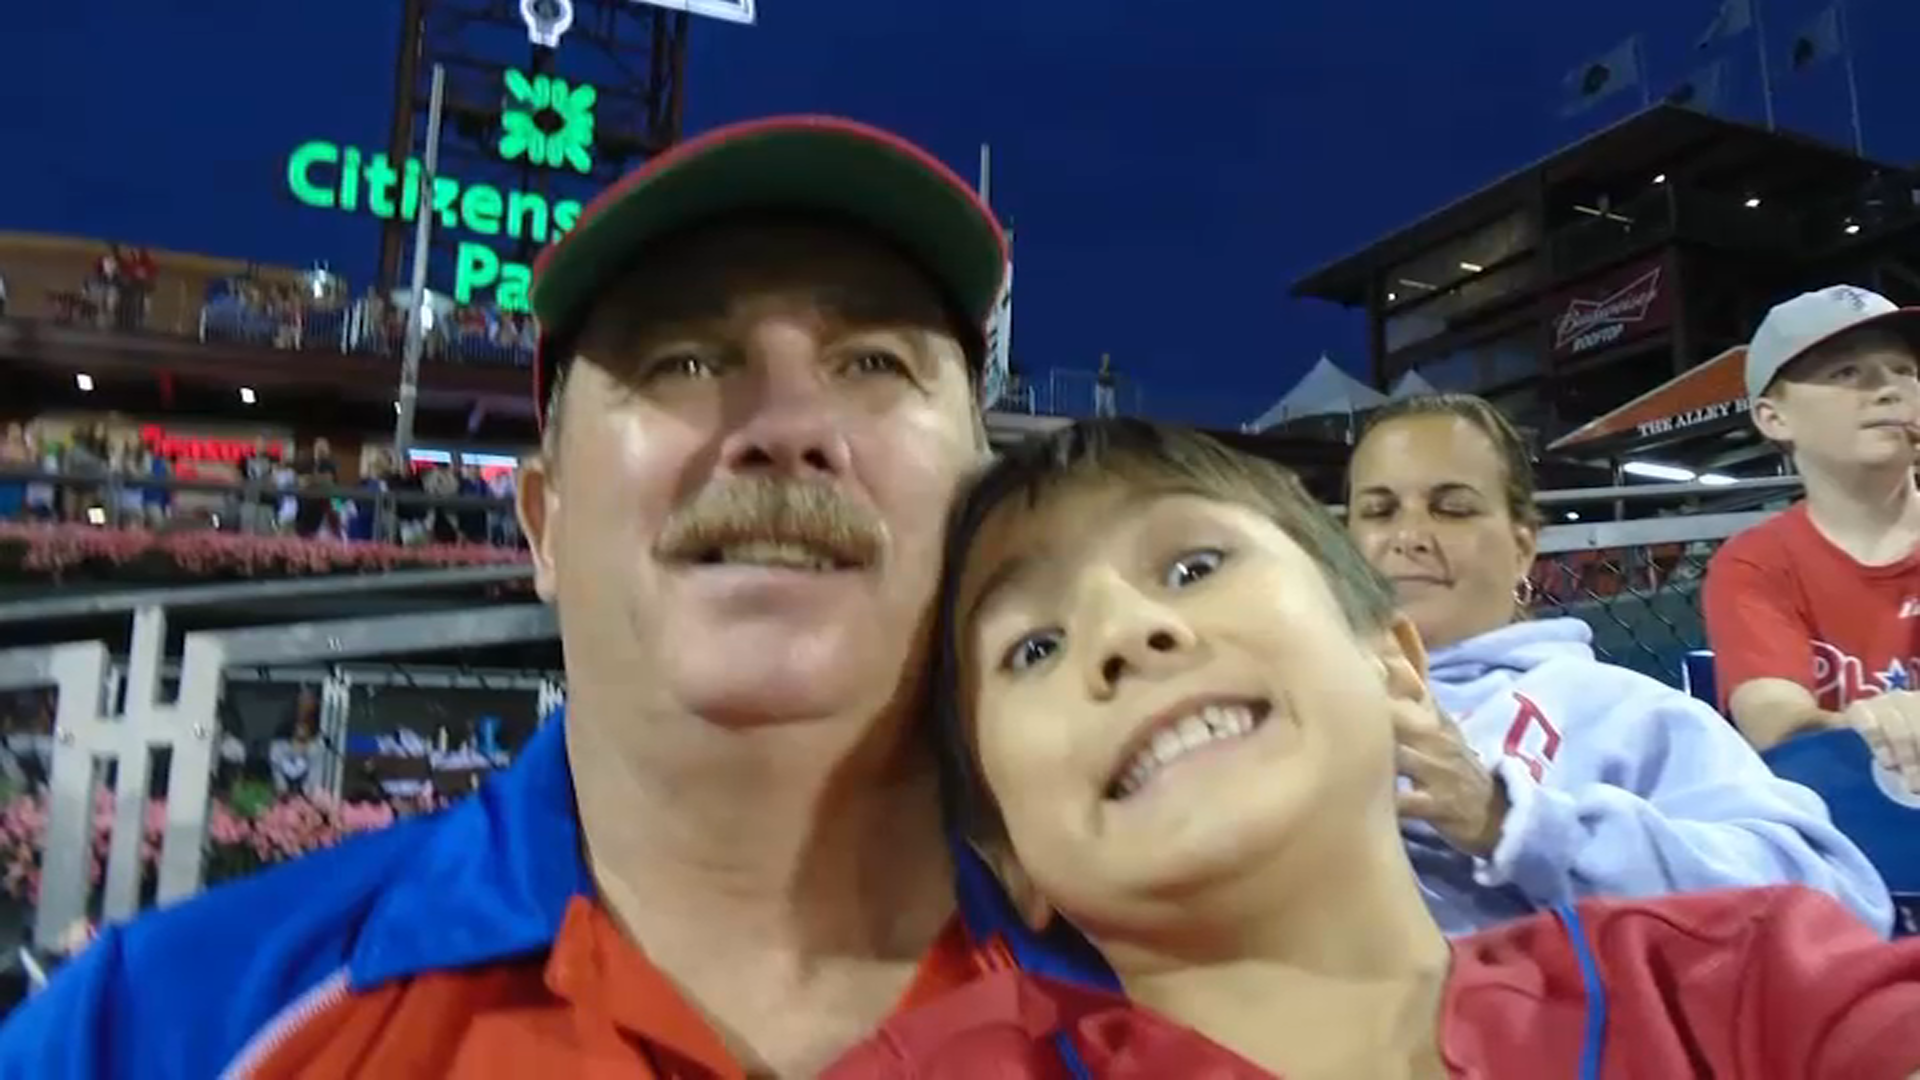 Phillies Girl Who Went Viral At A Game Has Been ID'd